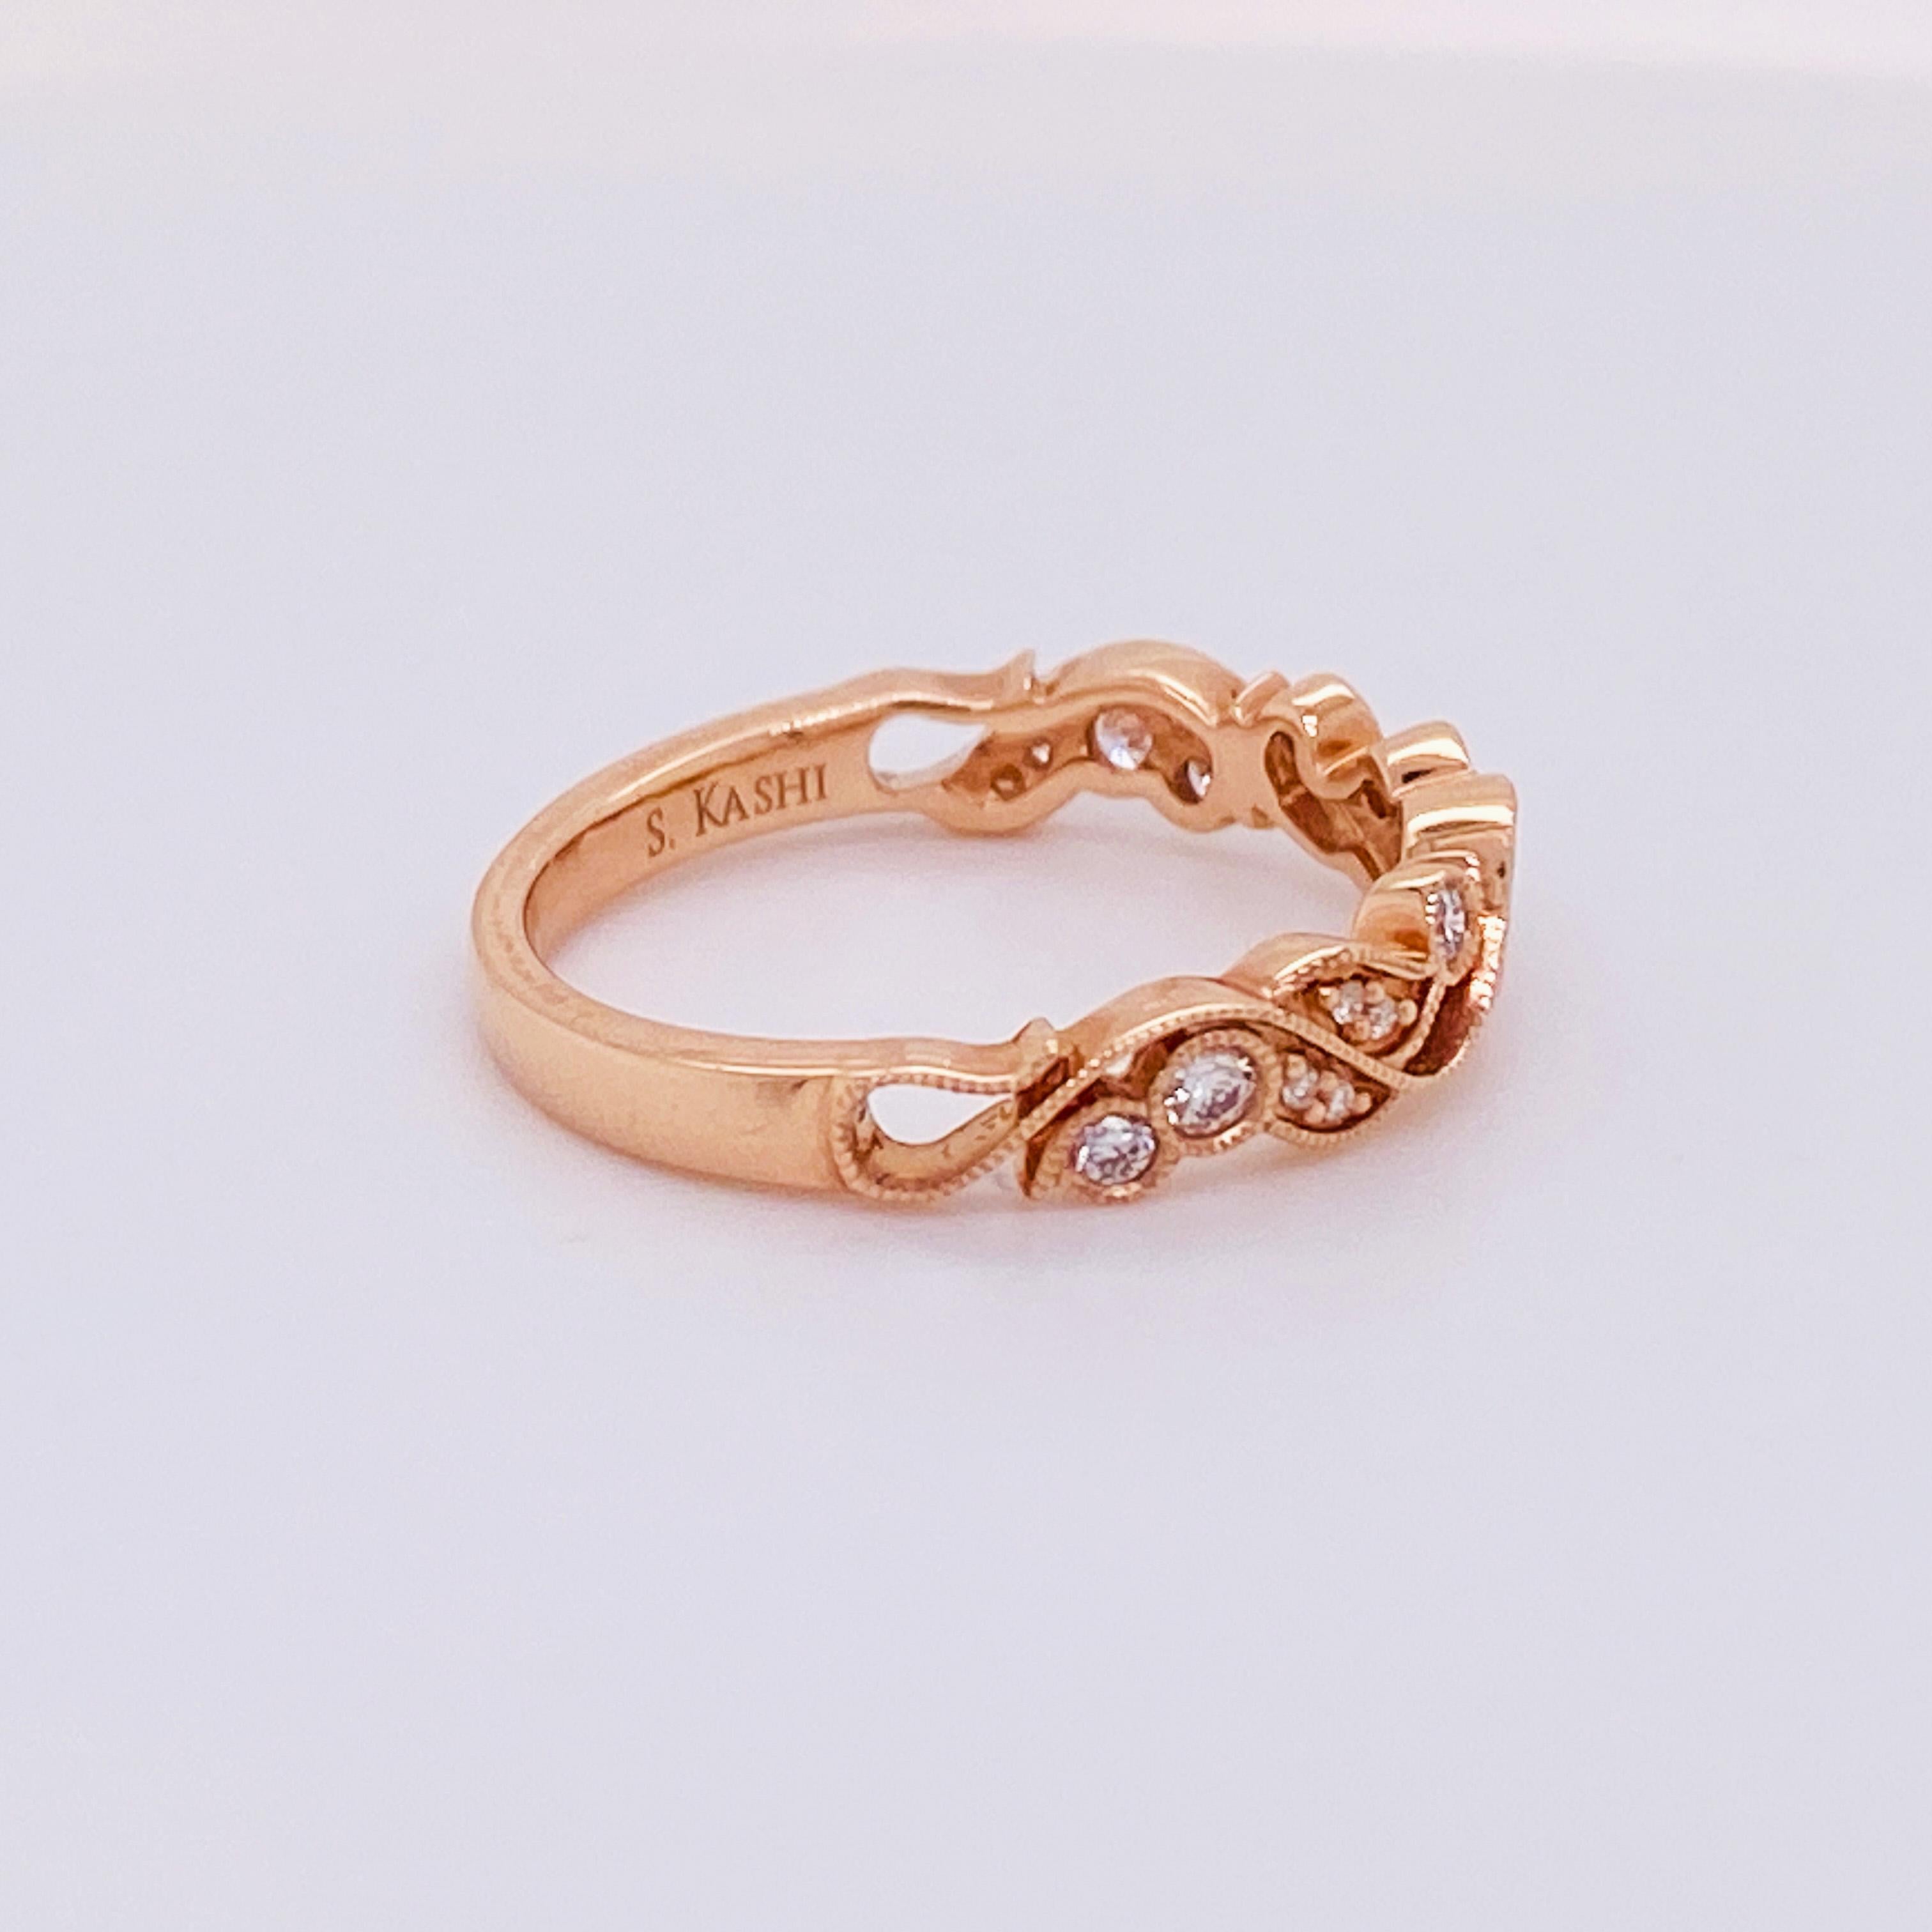 For Sale:  Leaf and Vine Diamond Ring .16 Carats in Rose Gold Stacking or Wedding Band LV 3